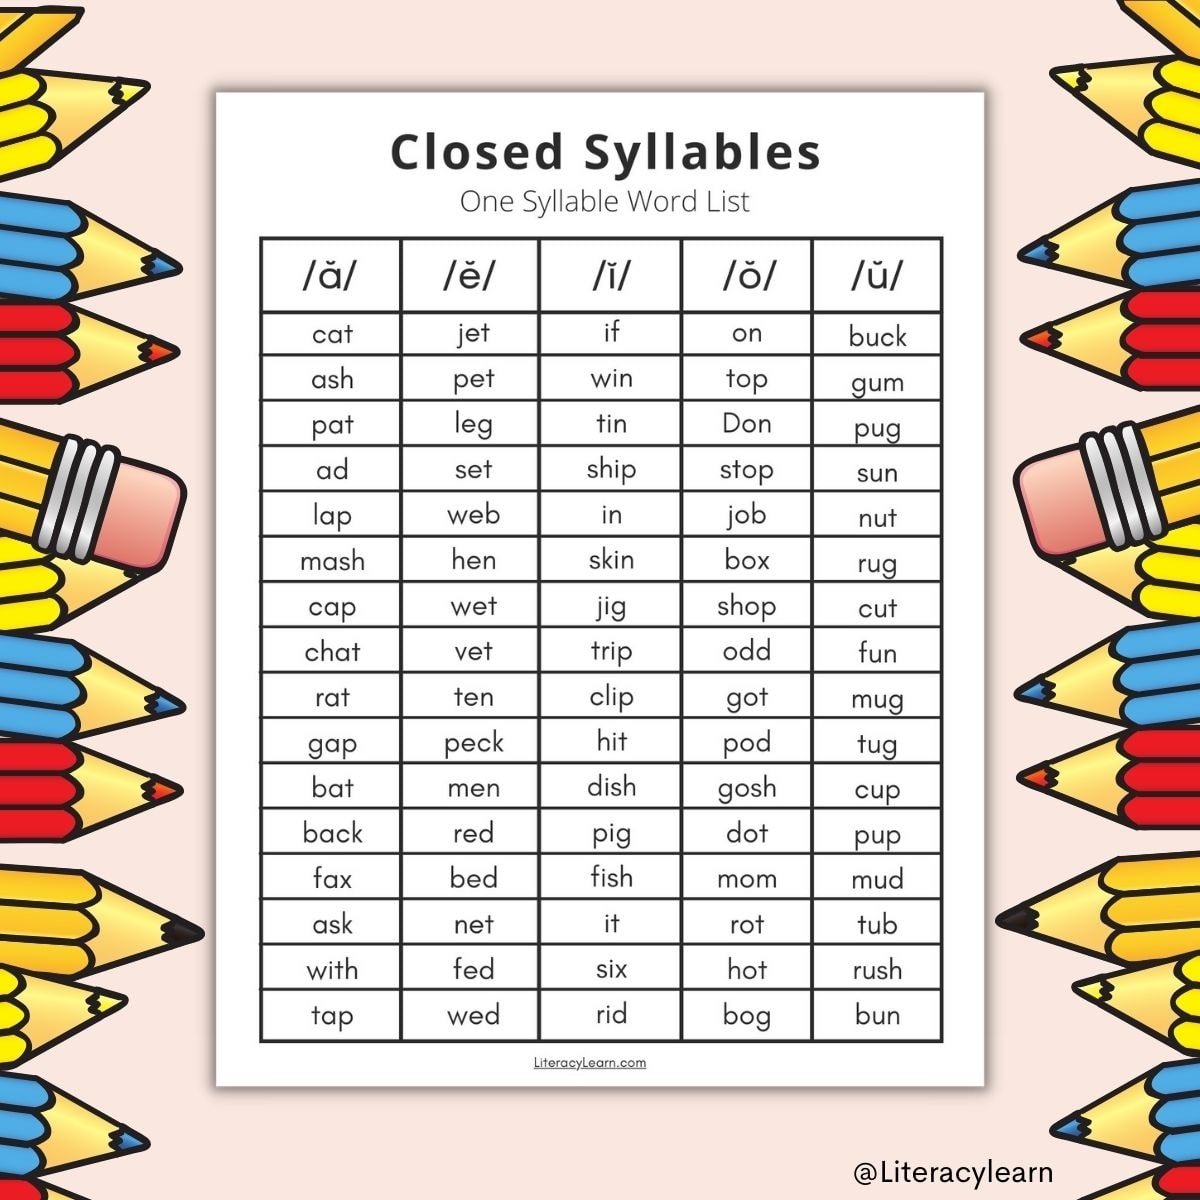 phonics-closed-syllables-short-vowels-cvc-words-ongoing-class-my-xxx